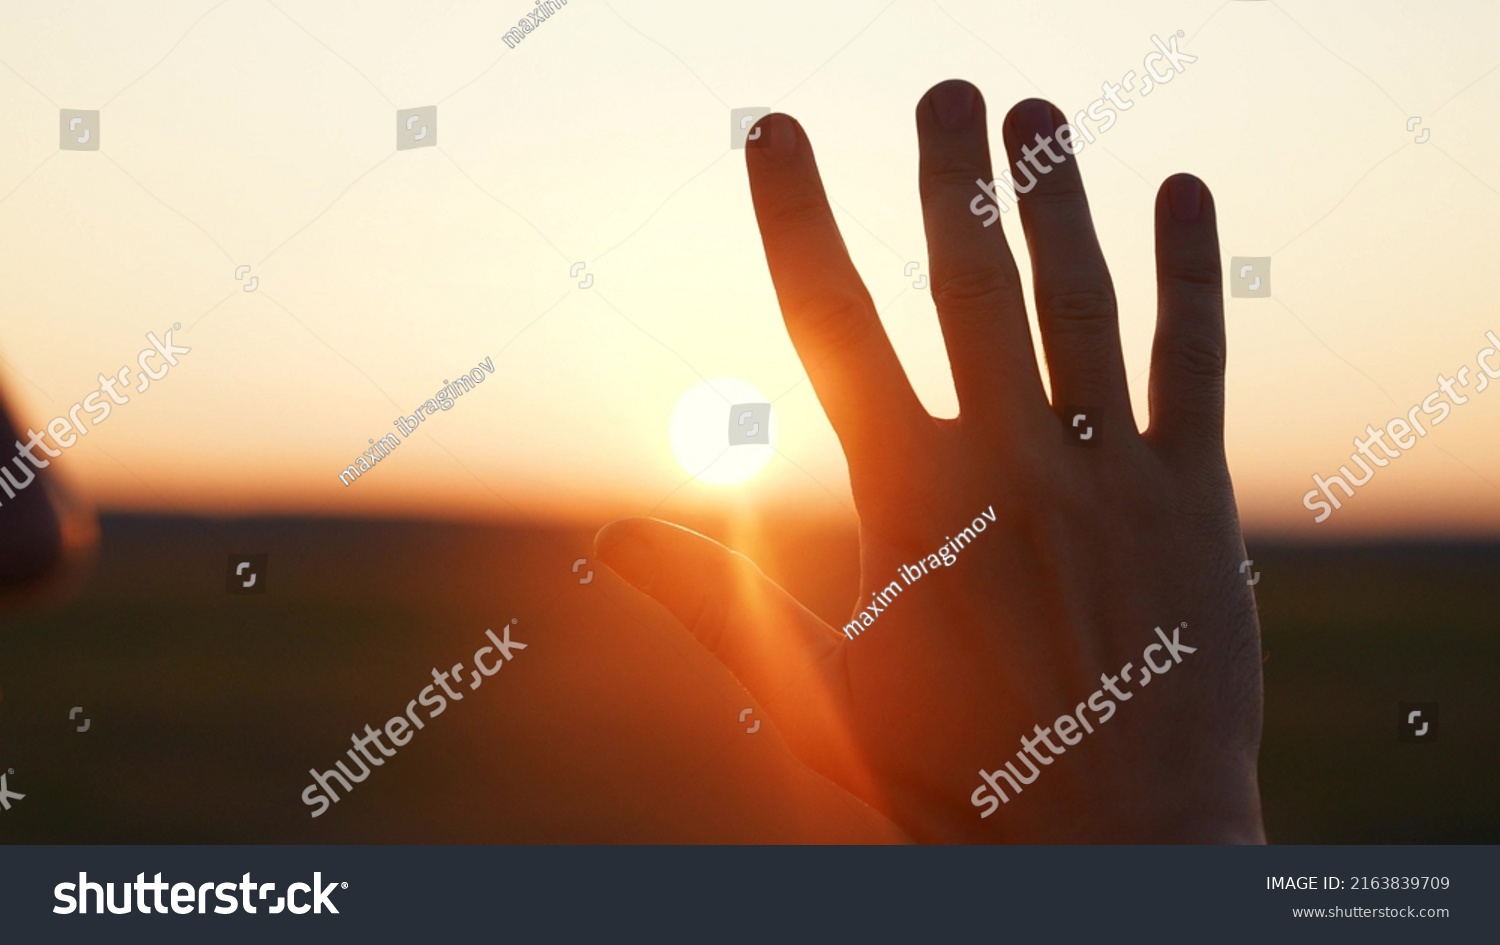 man hand silhouette sunlight. Muslim with man hand sun on light background. christian business love religion concept. christianity and religion belief in god. man sunlight hand reaches for sun god #2163839709